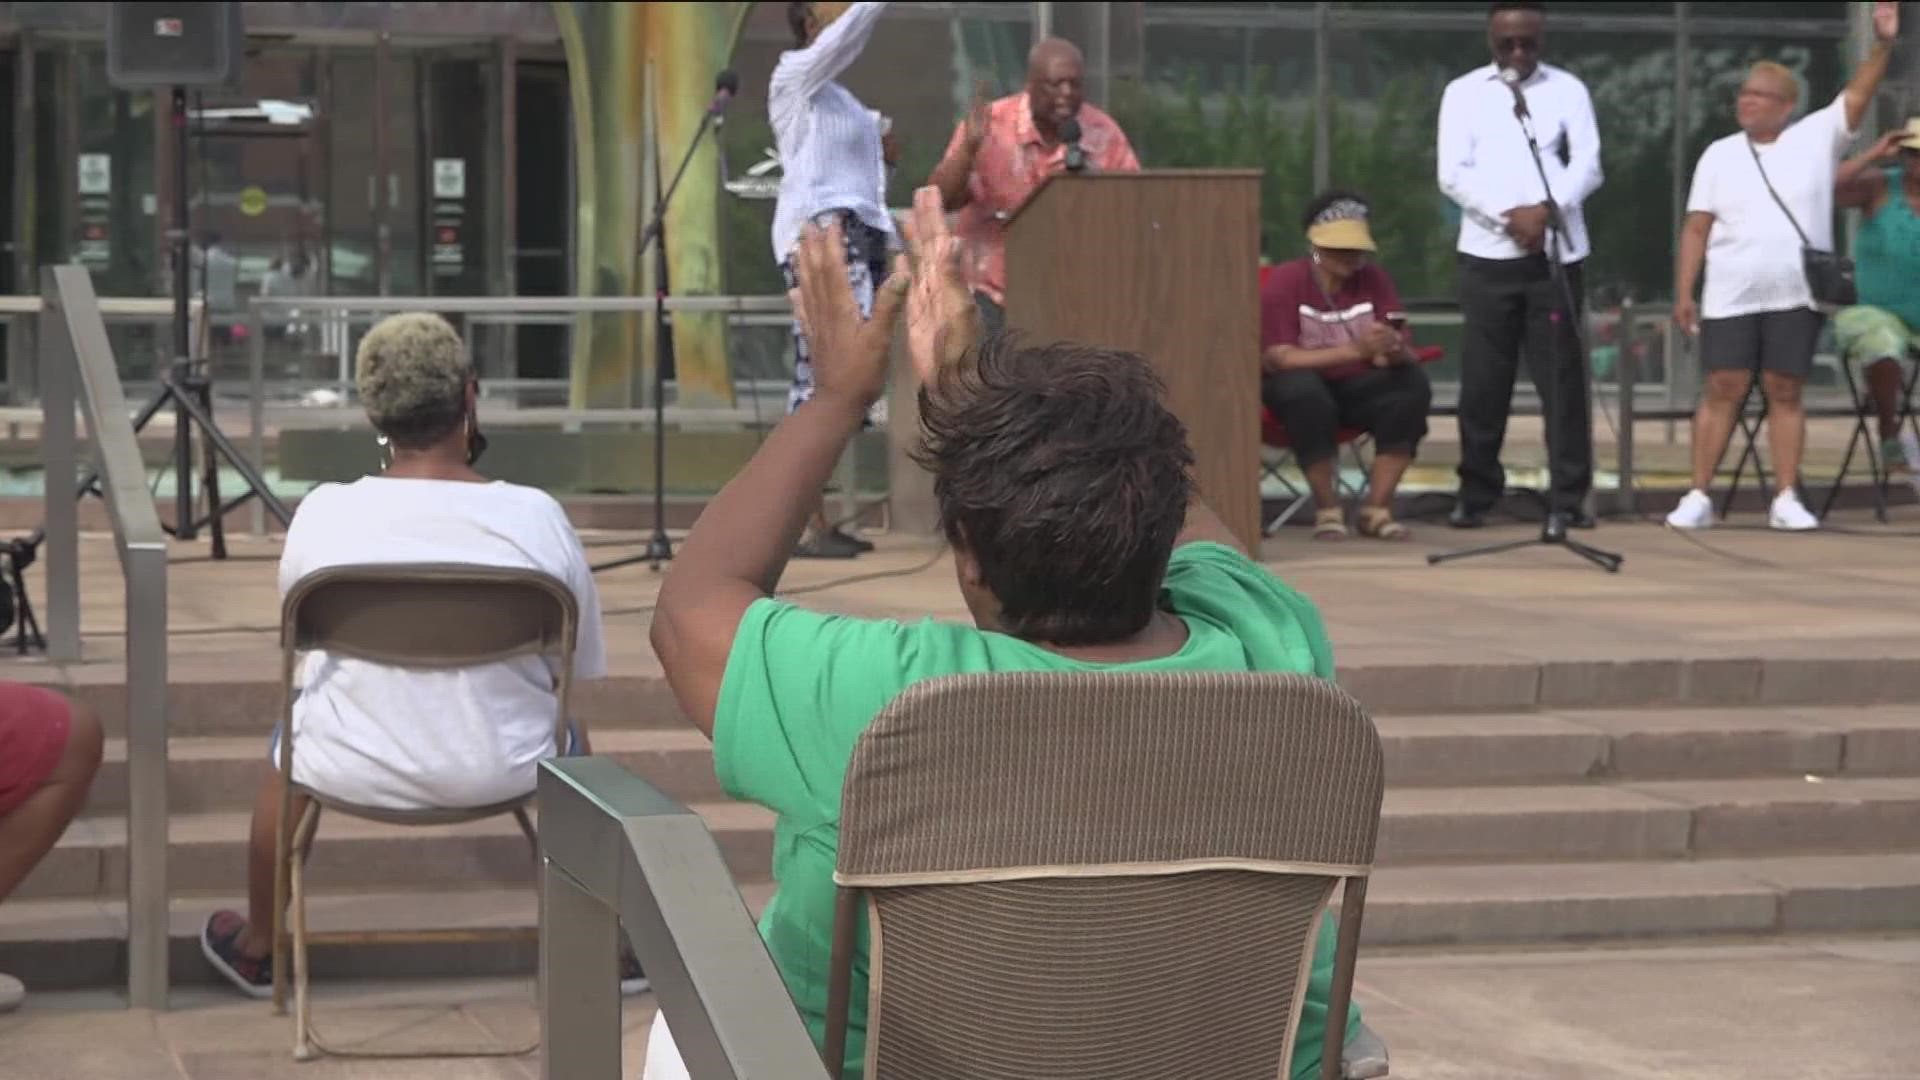 At the One Government Center on Sunday, ministers and community members came together to uplift the community in prayer to rise above gun violence.